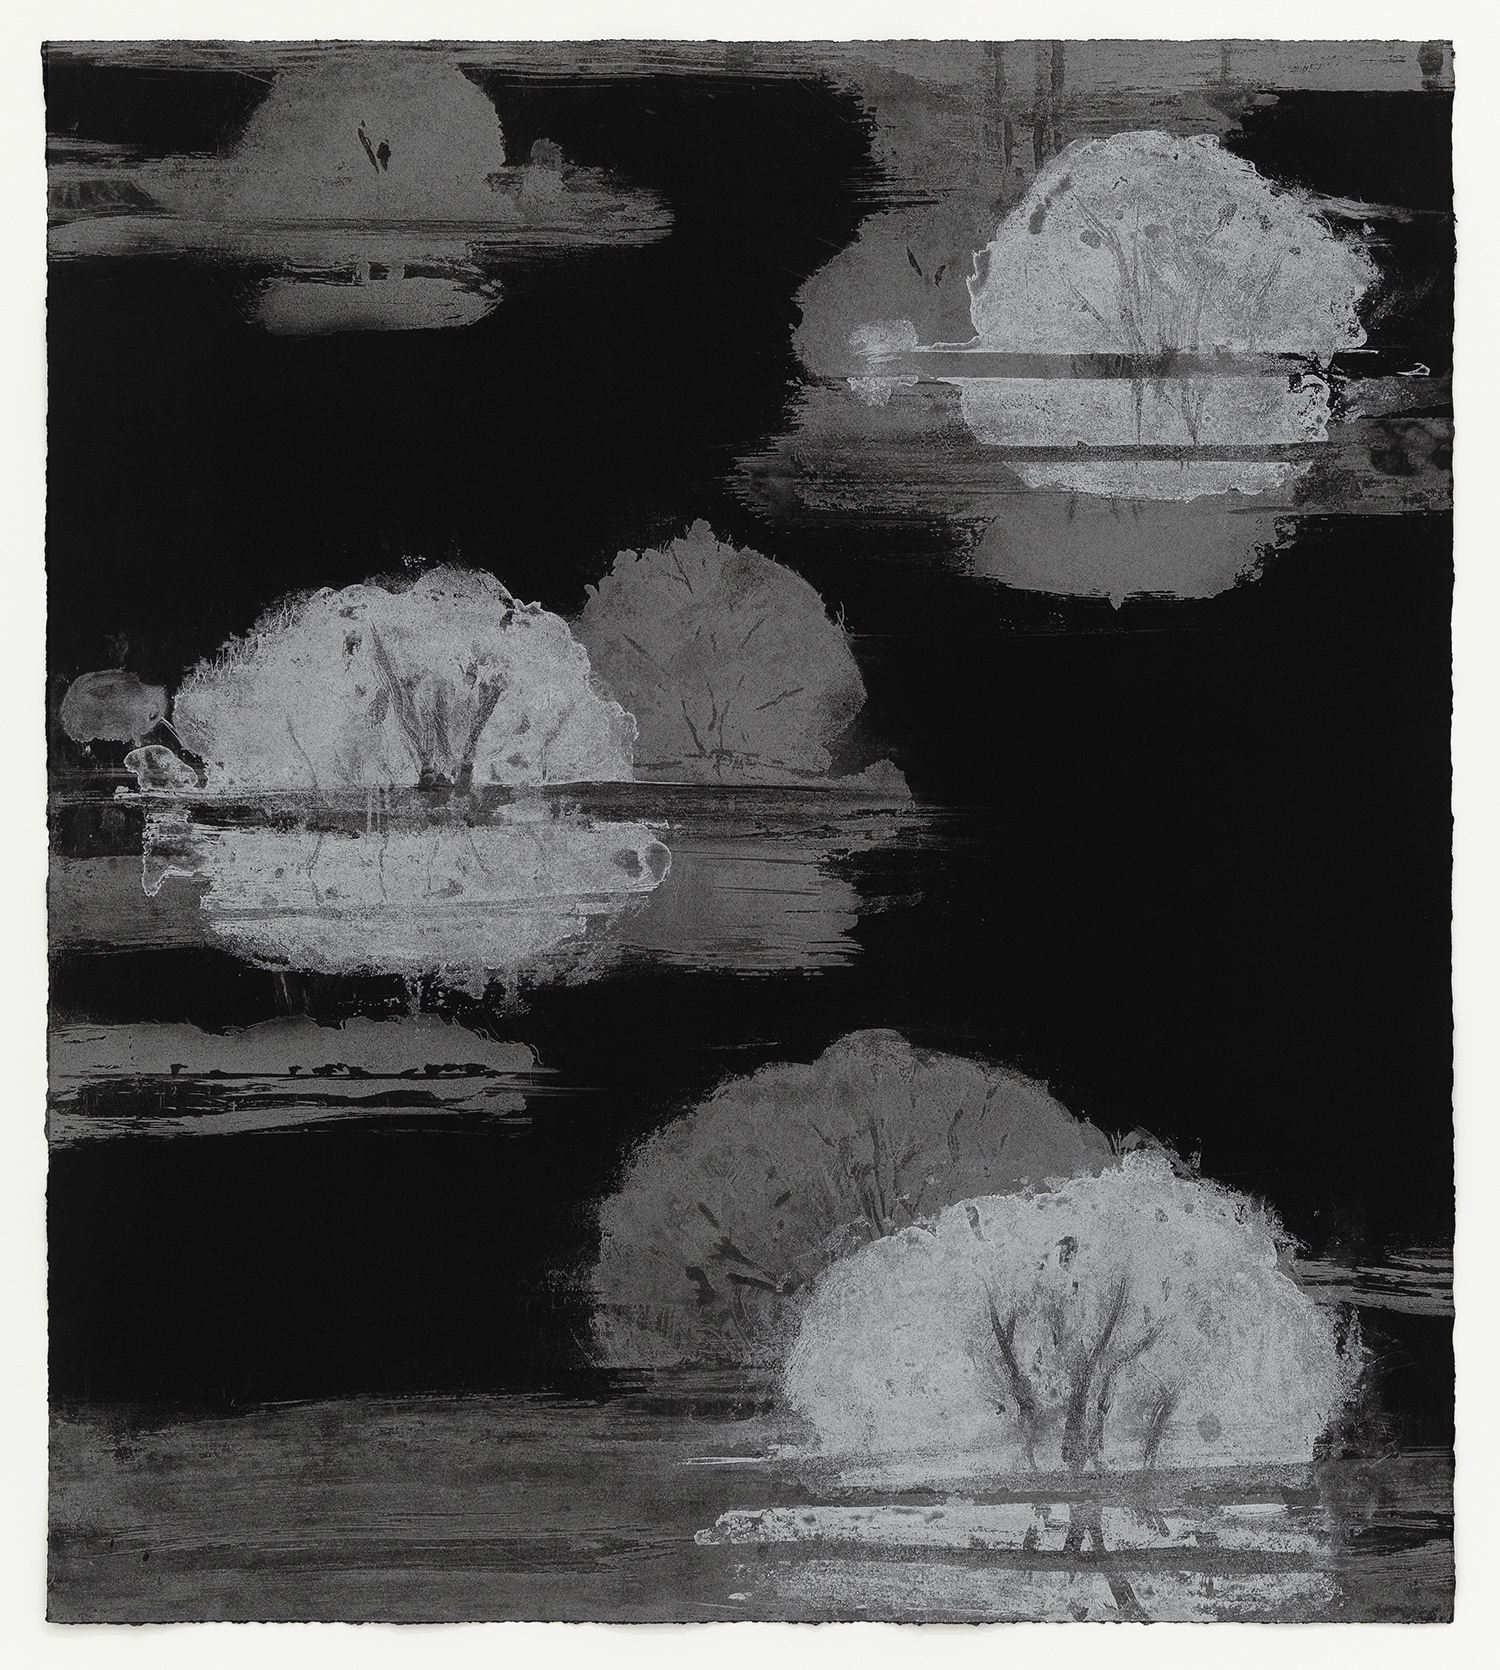 Gail's Island 3, 2008, Etching and aquatint, 28 3/8 x 25 3/8 inches (72.1 x 64.5 cm), Edition of 25